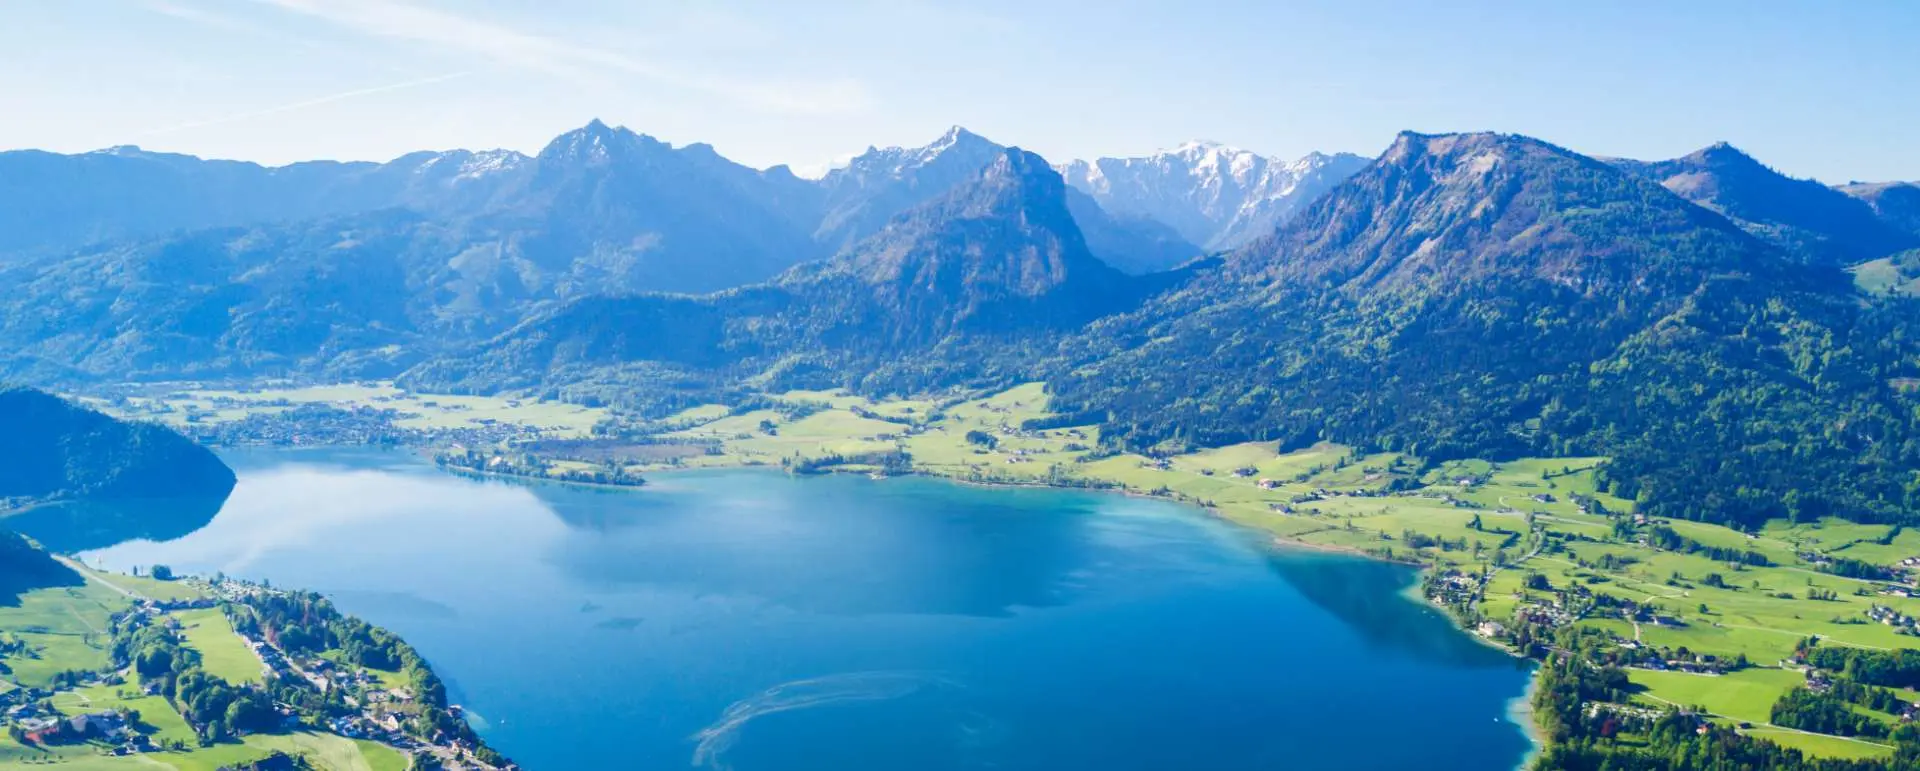 Wolfgangsee Lake - the destination for group hotels with pool